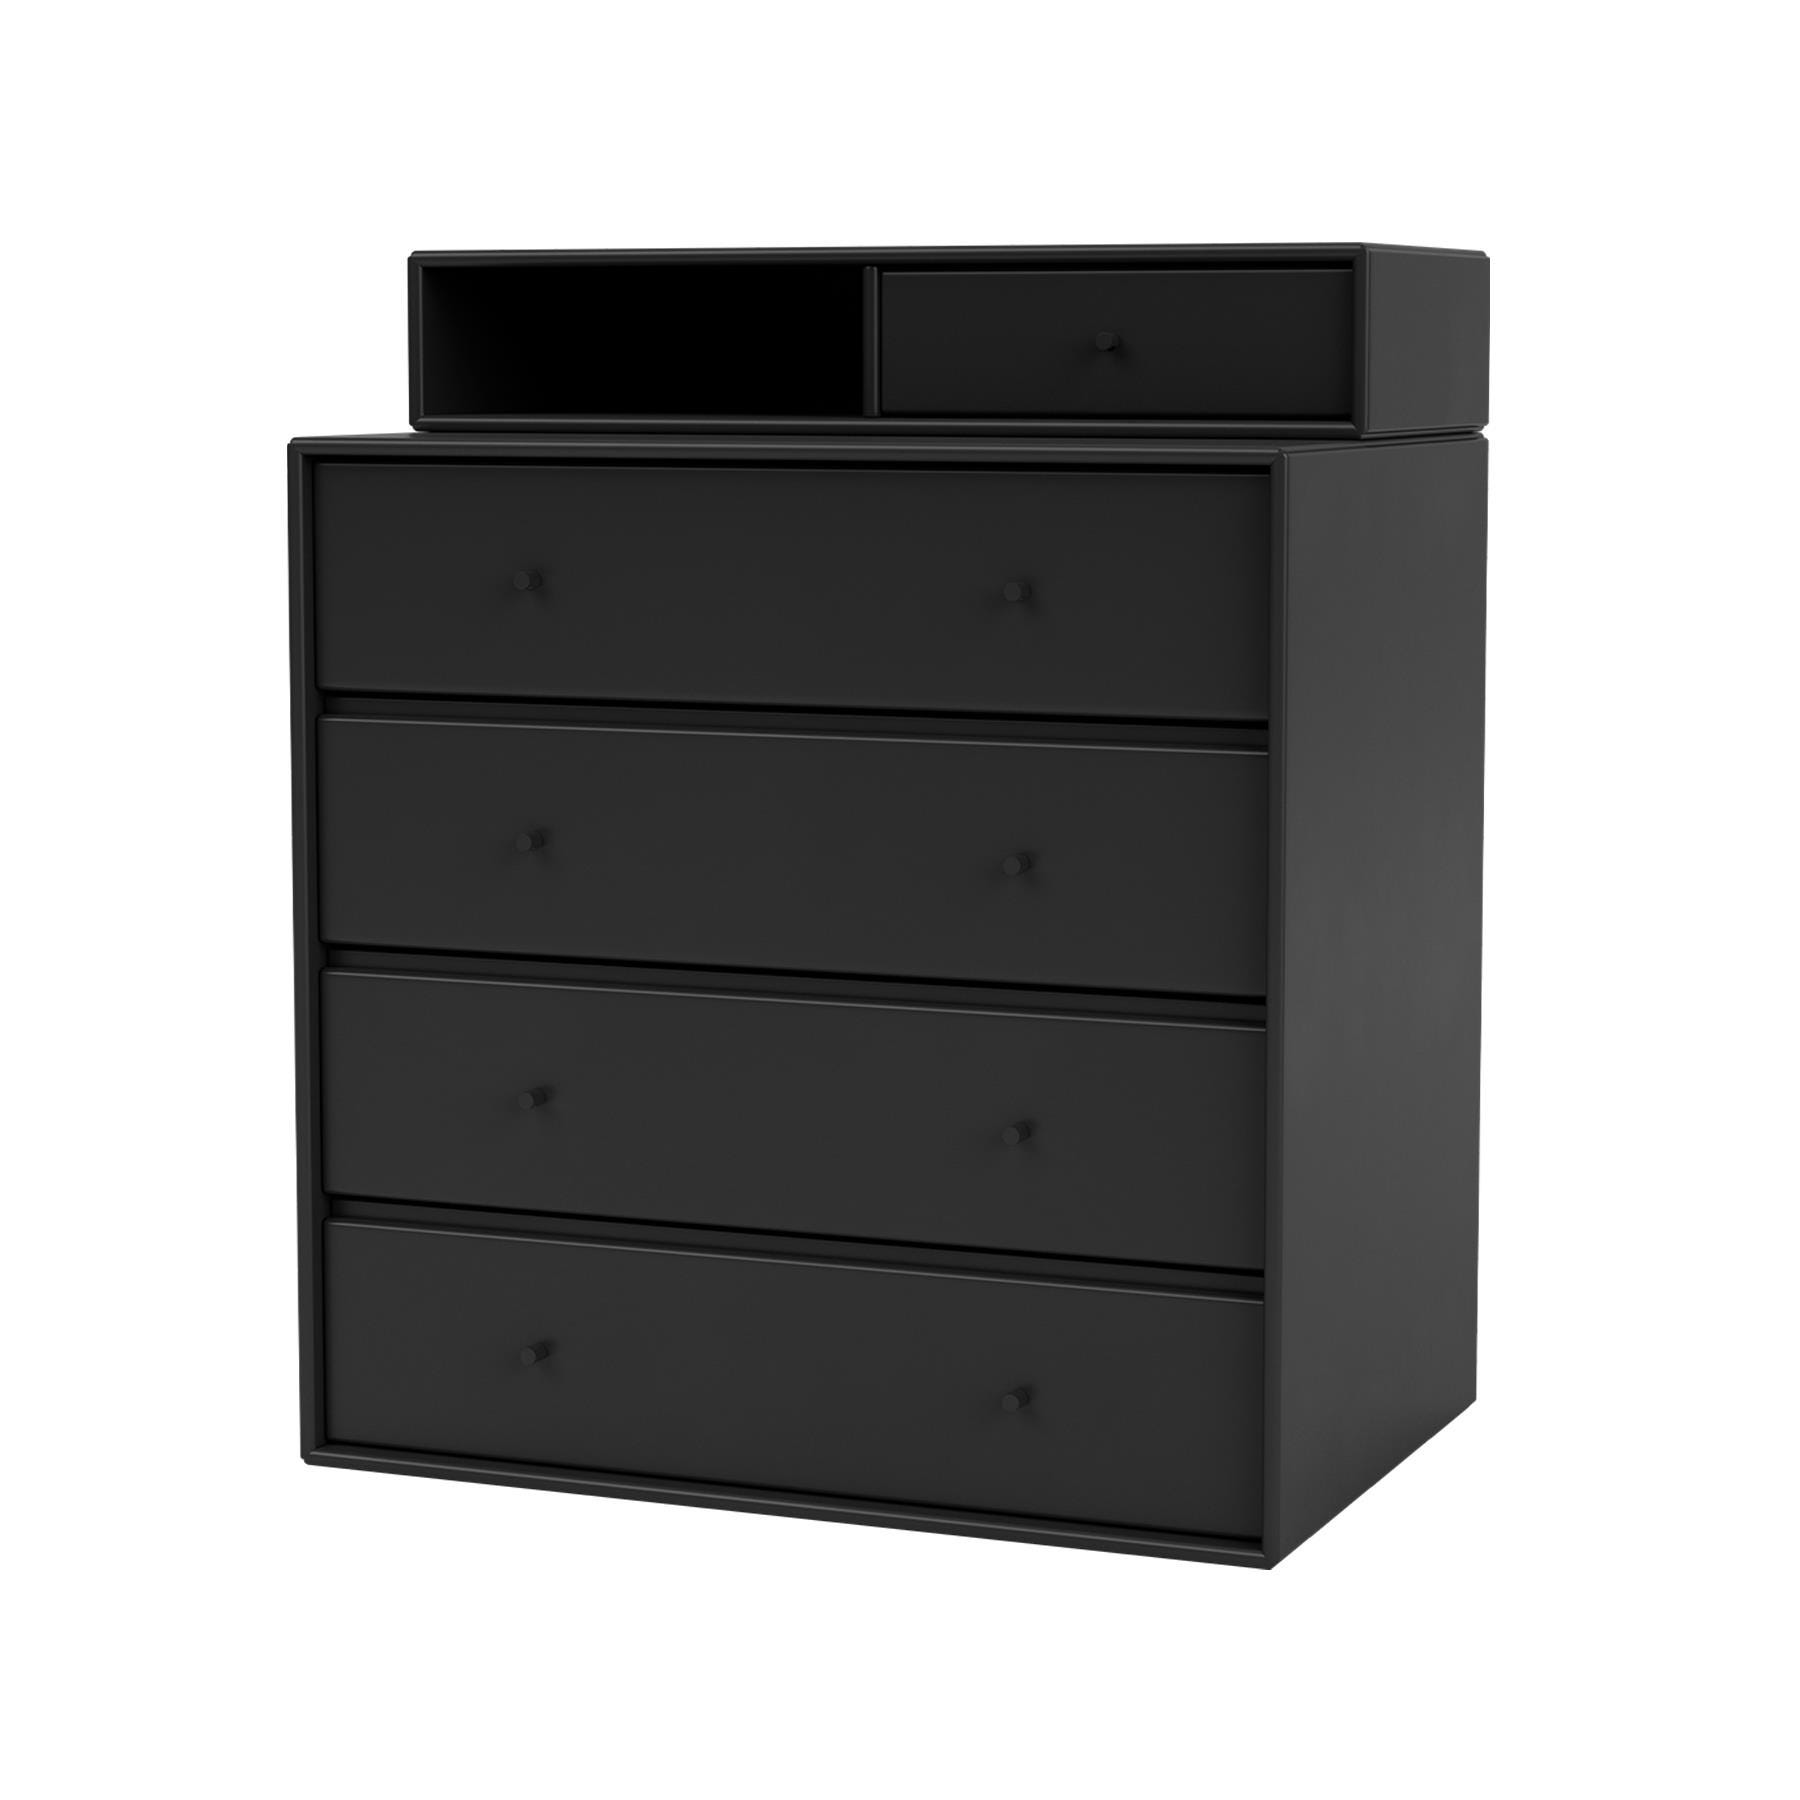 Montana Keep Chest Of Drawers Black Wall Mounted Black Designer Furniture From Holloways Of Ludlow